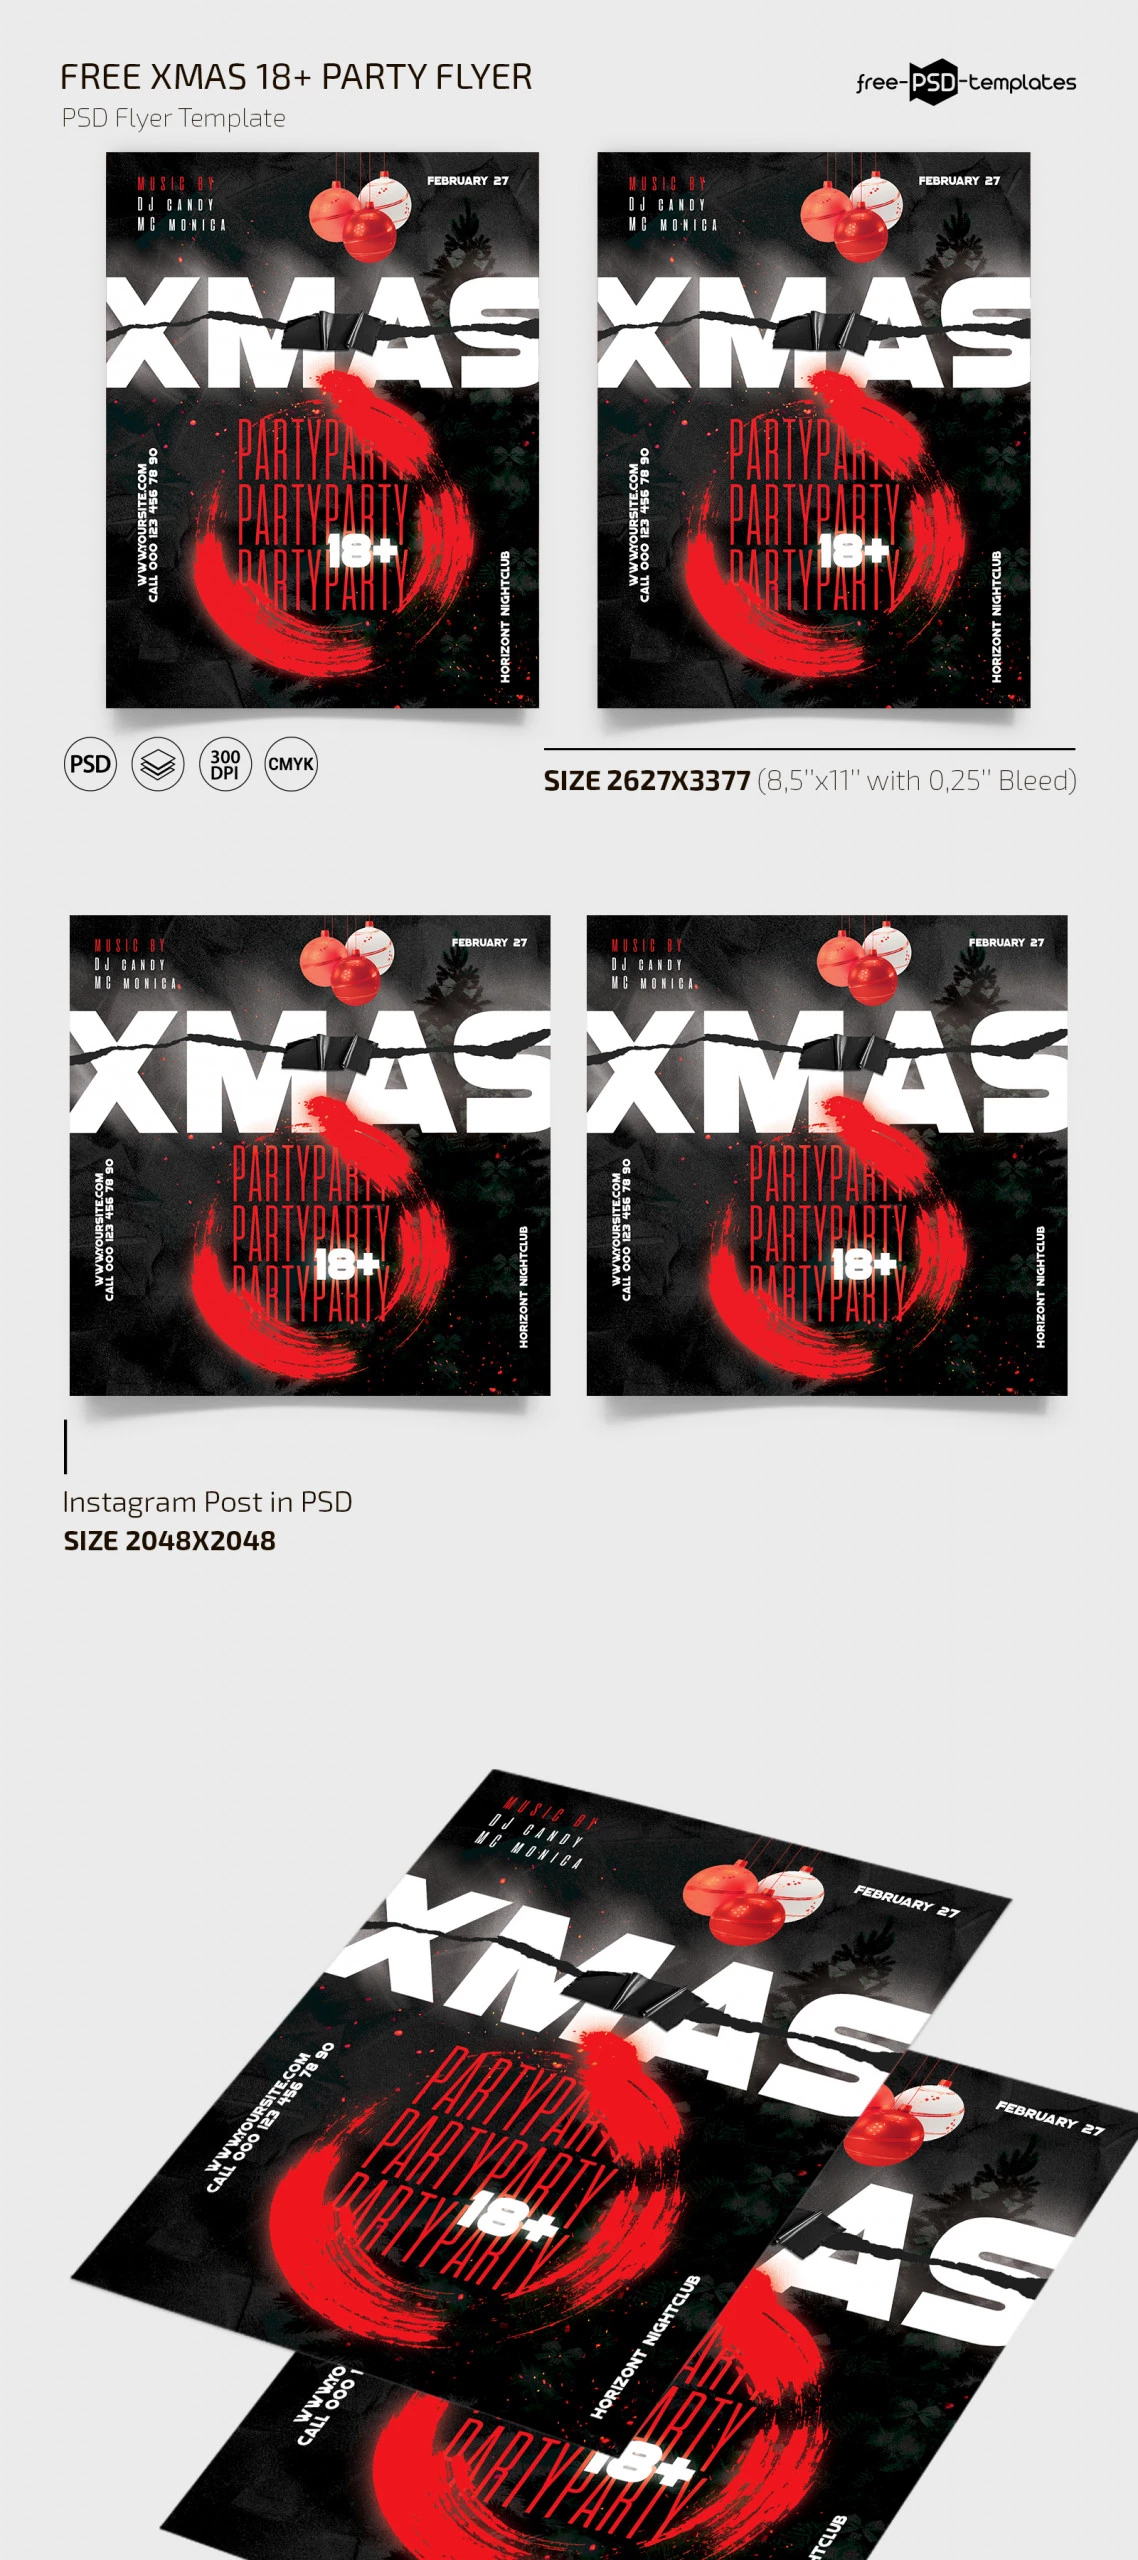 Free Xmas 18+ Party Flyer Template + Instagram Post (PSD)